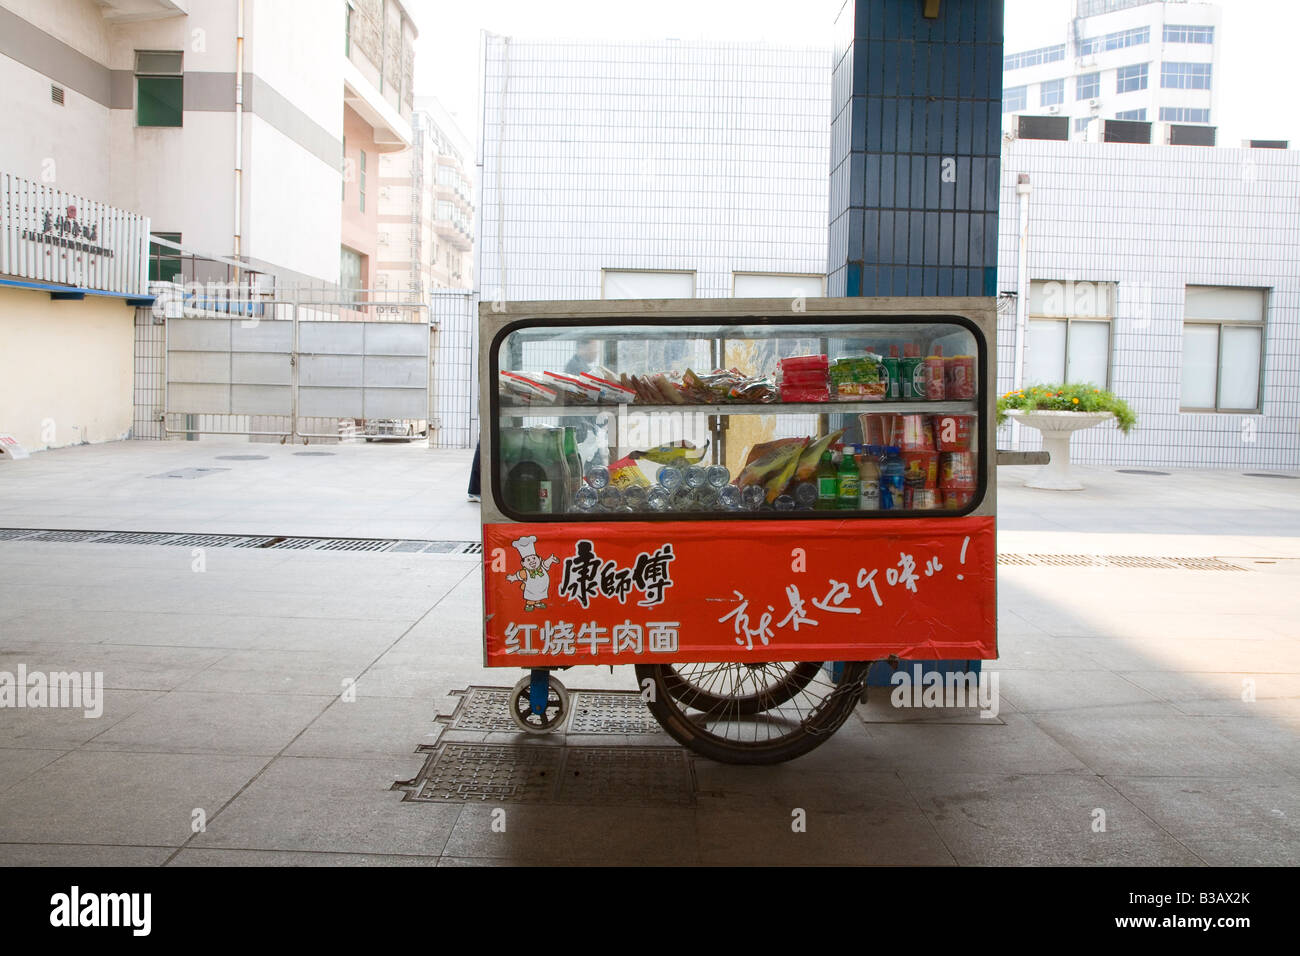 Snack cart at a Chinese railway Stock Photo